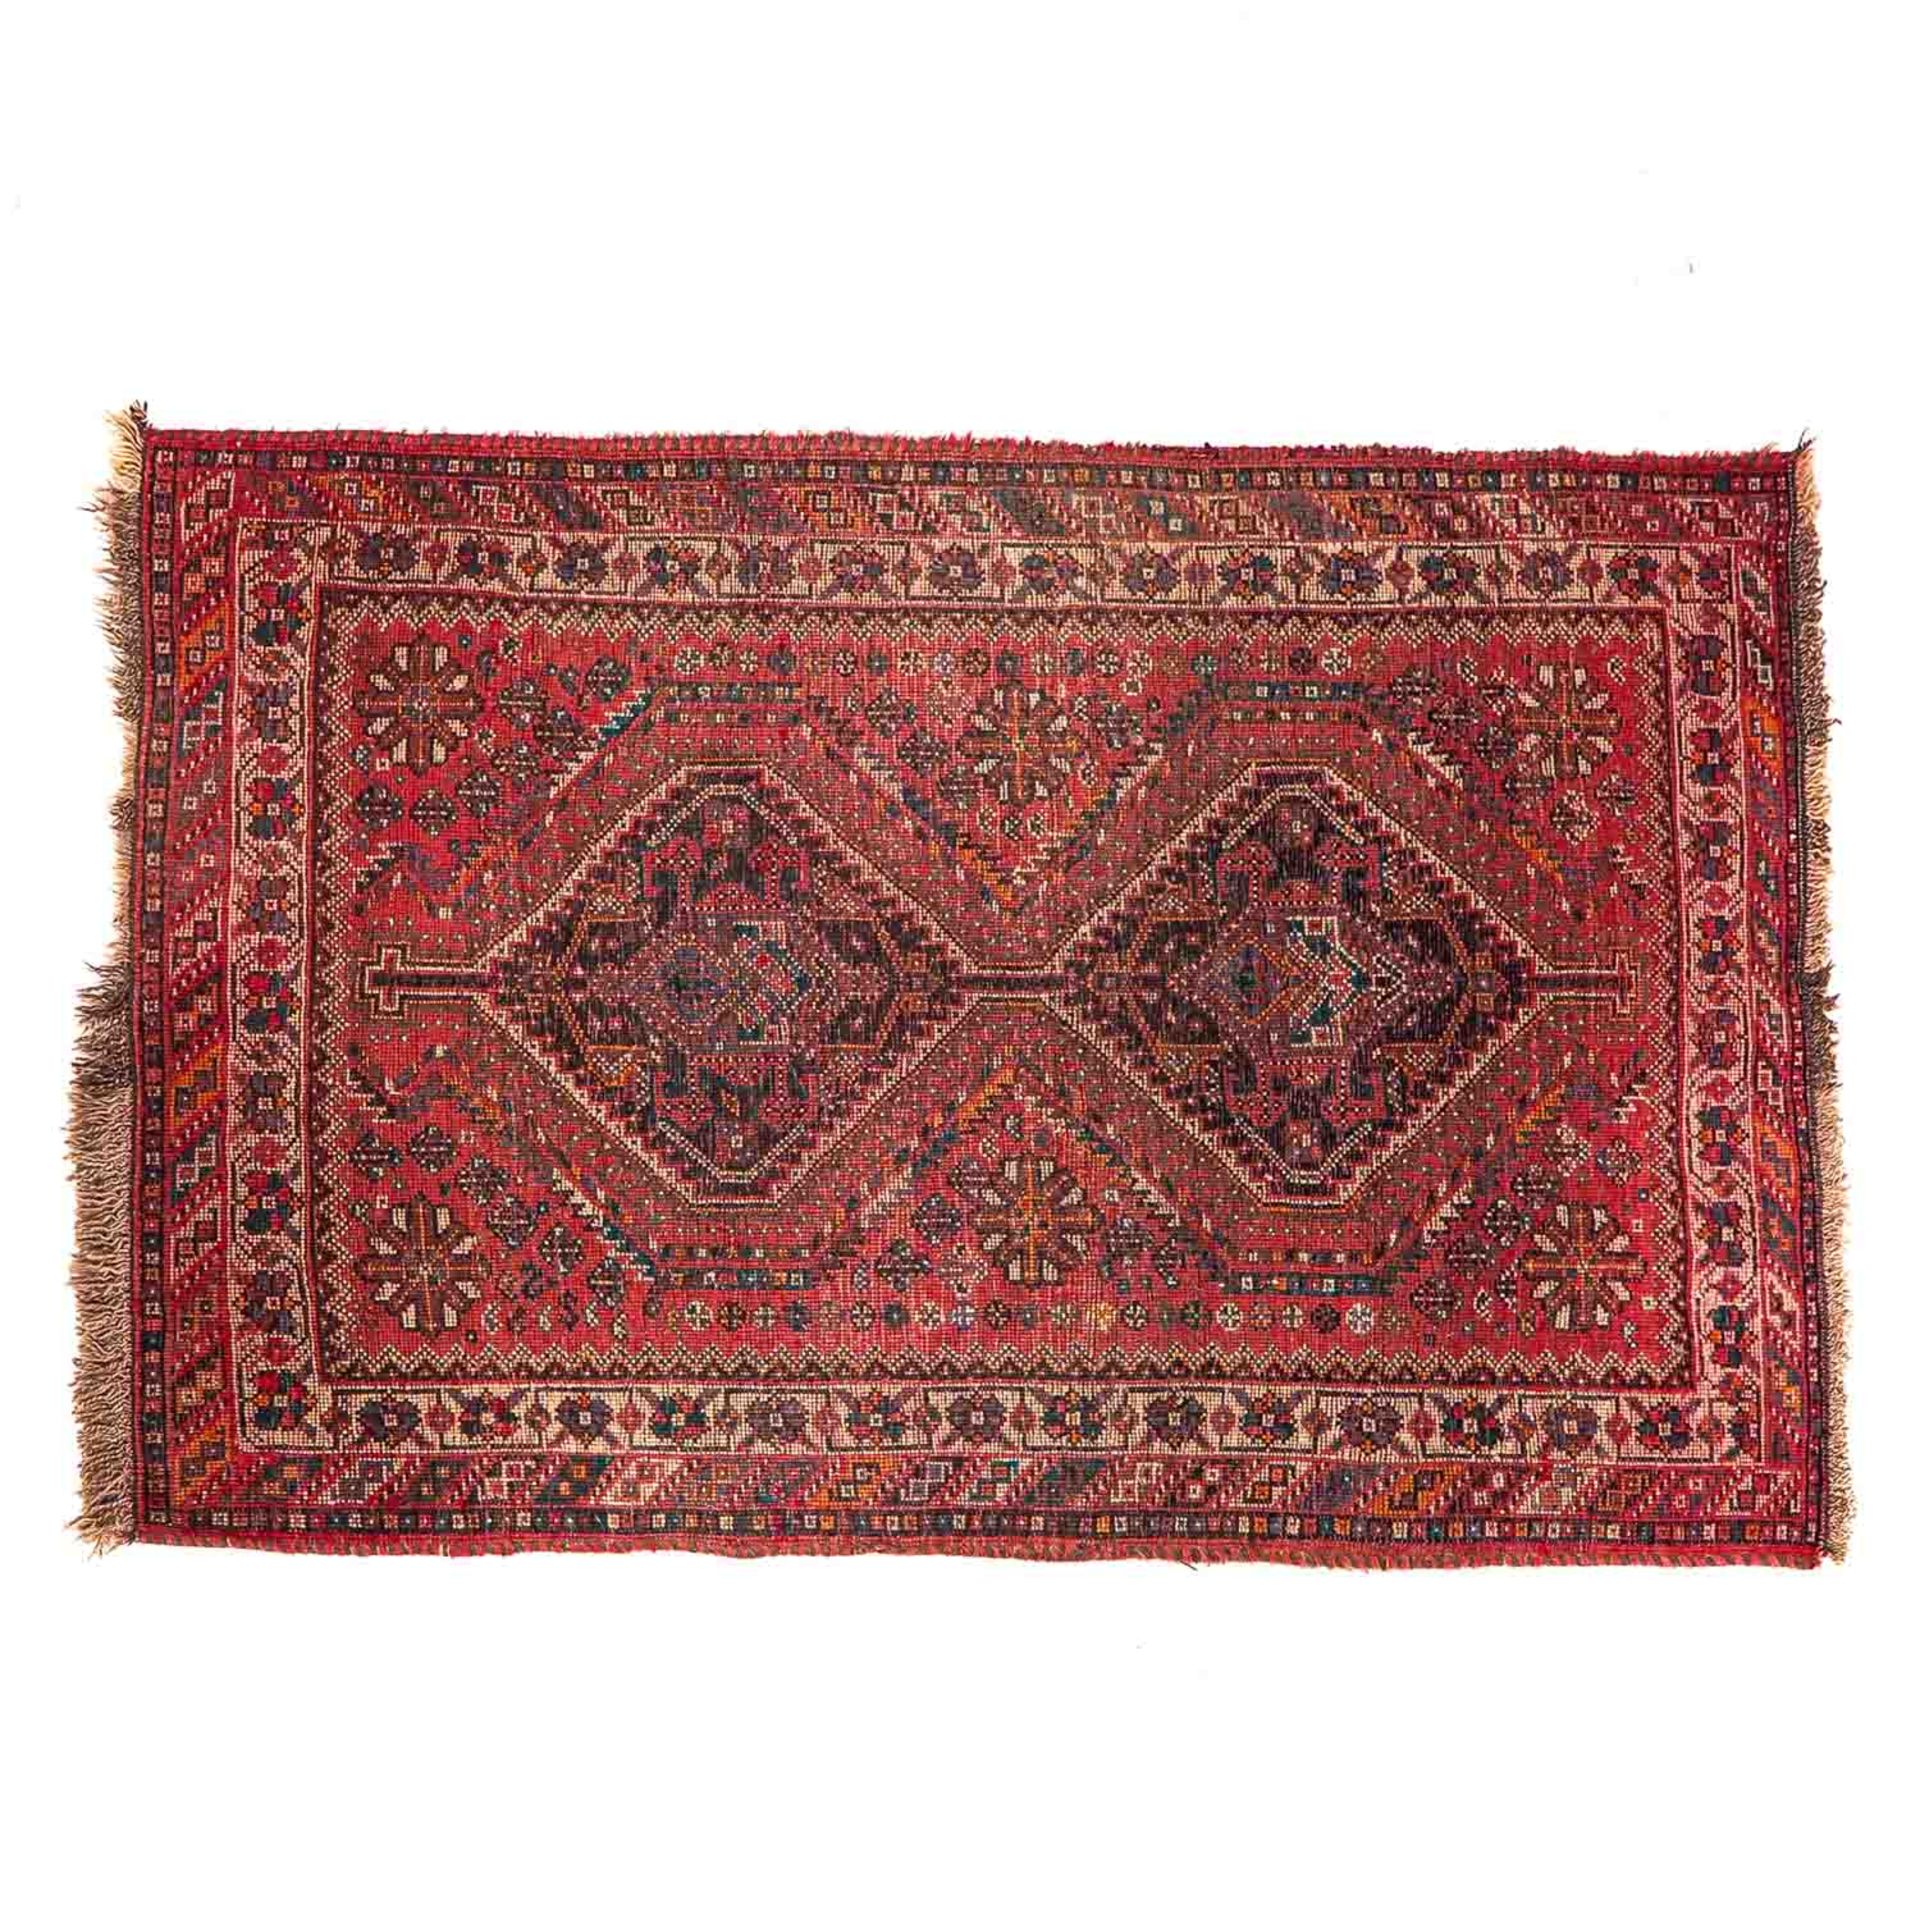 A Collection of 4 Persian Carpets - Image 5 of 9